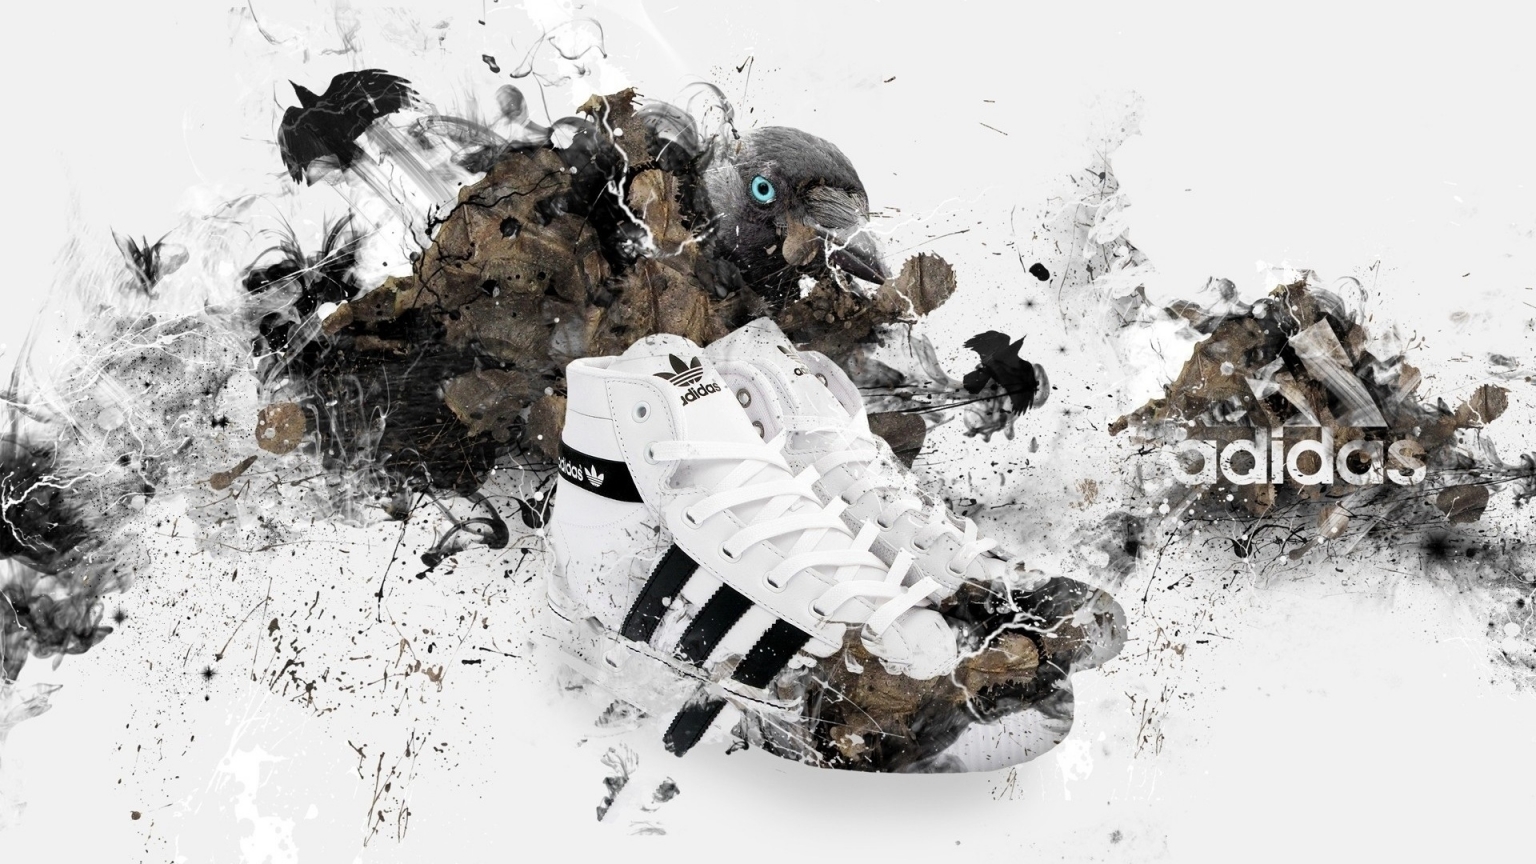 Adidas Shoes for 1536 x 864 HDTV resolution